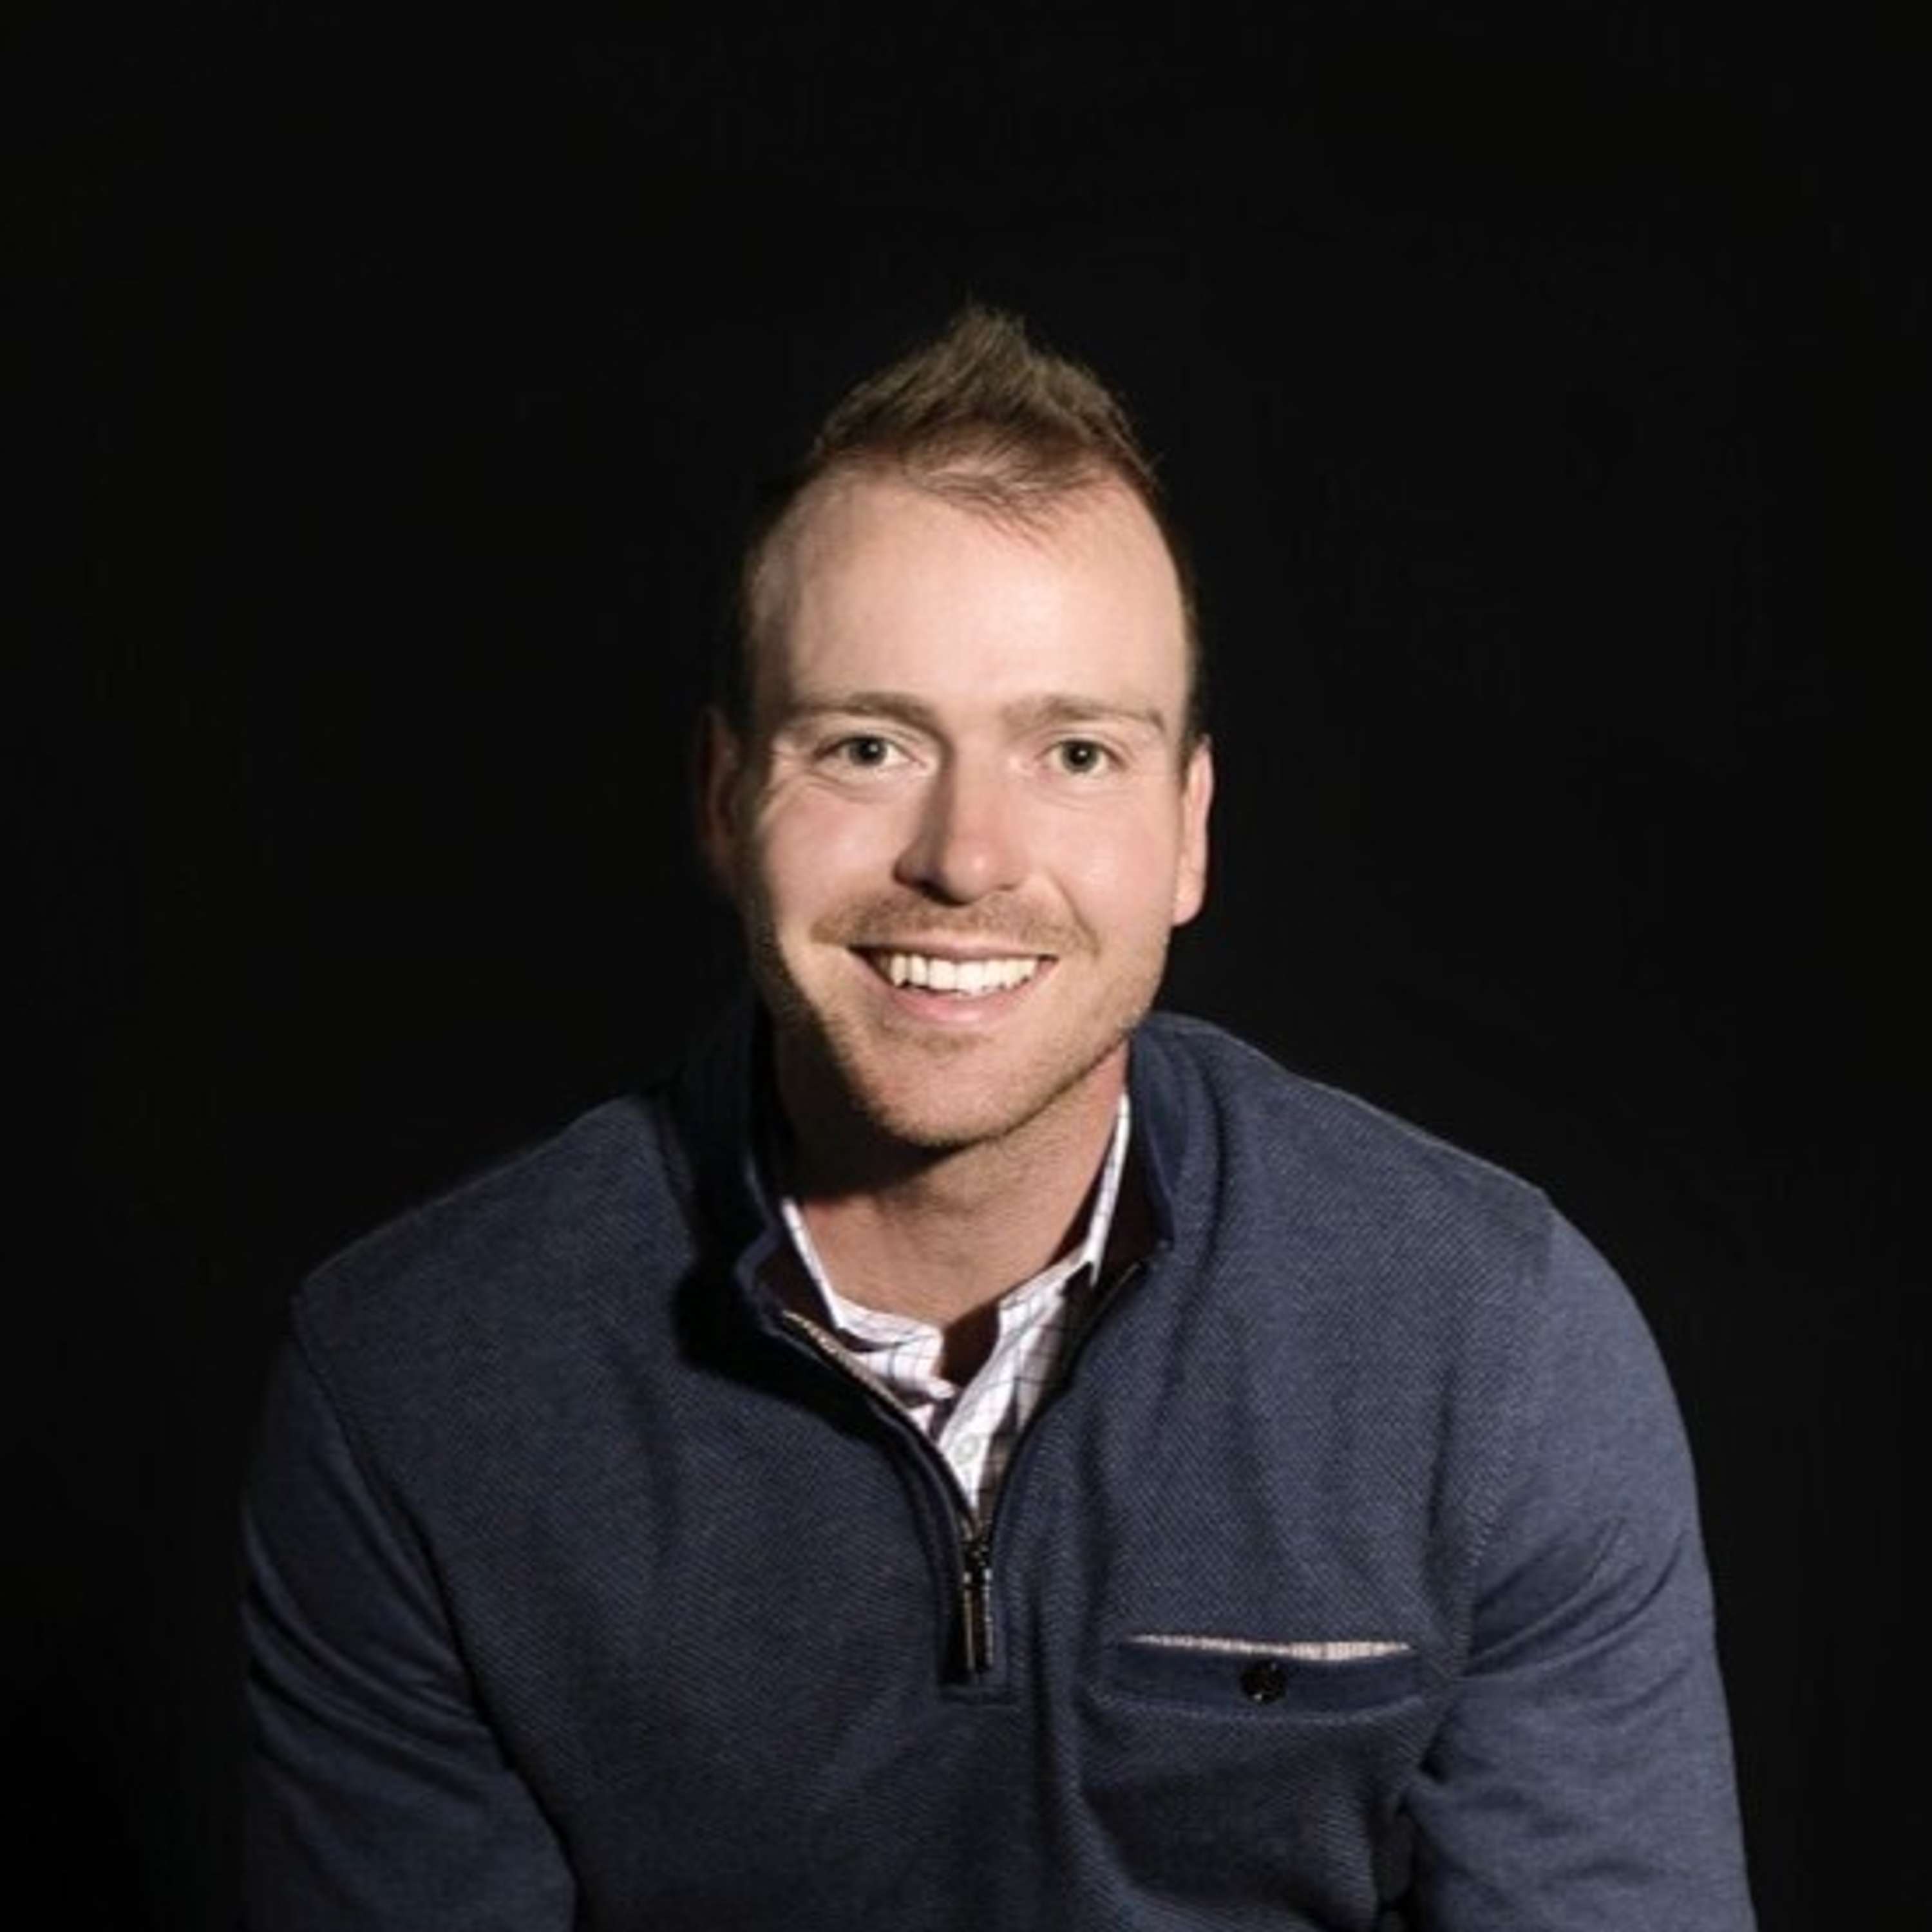 938 - Chris Kolb (HUM) On Building The Rideshare Platform That's Better To Drivers AND Riders